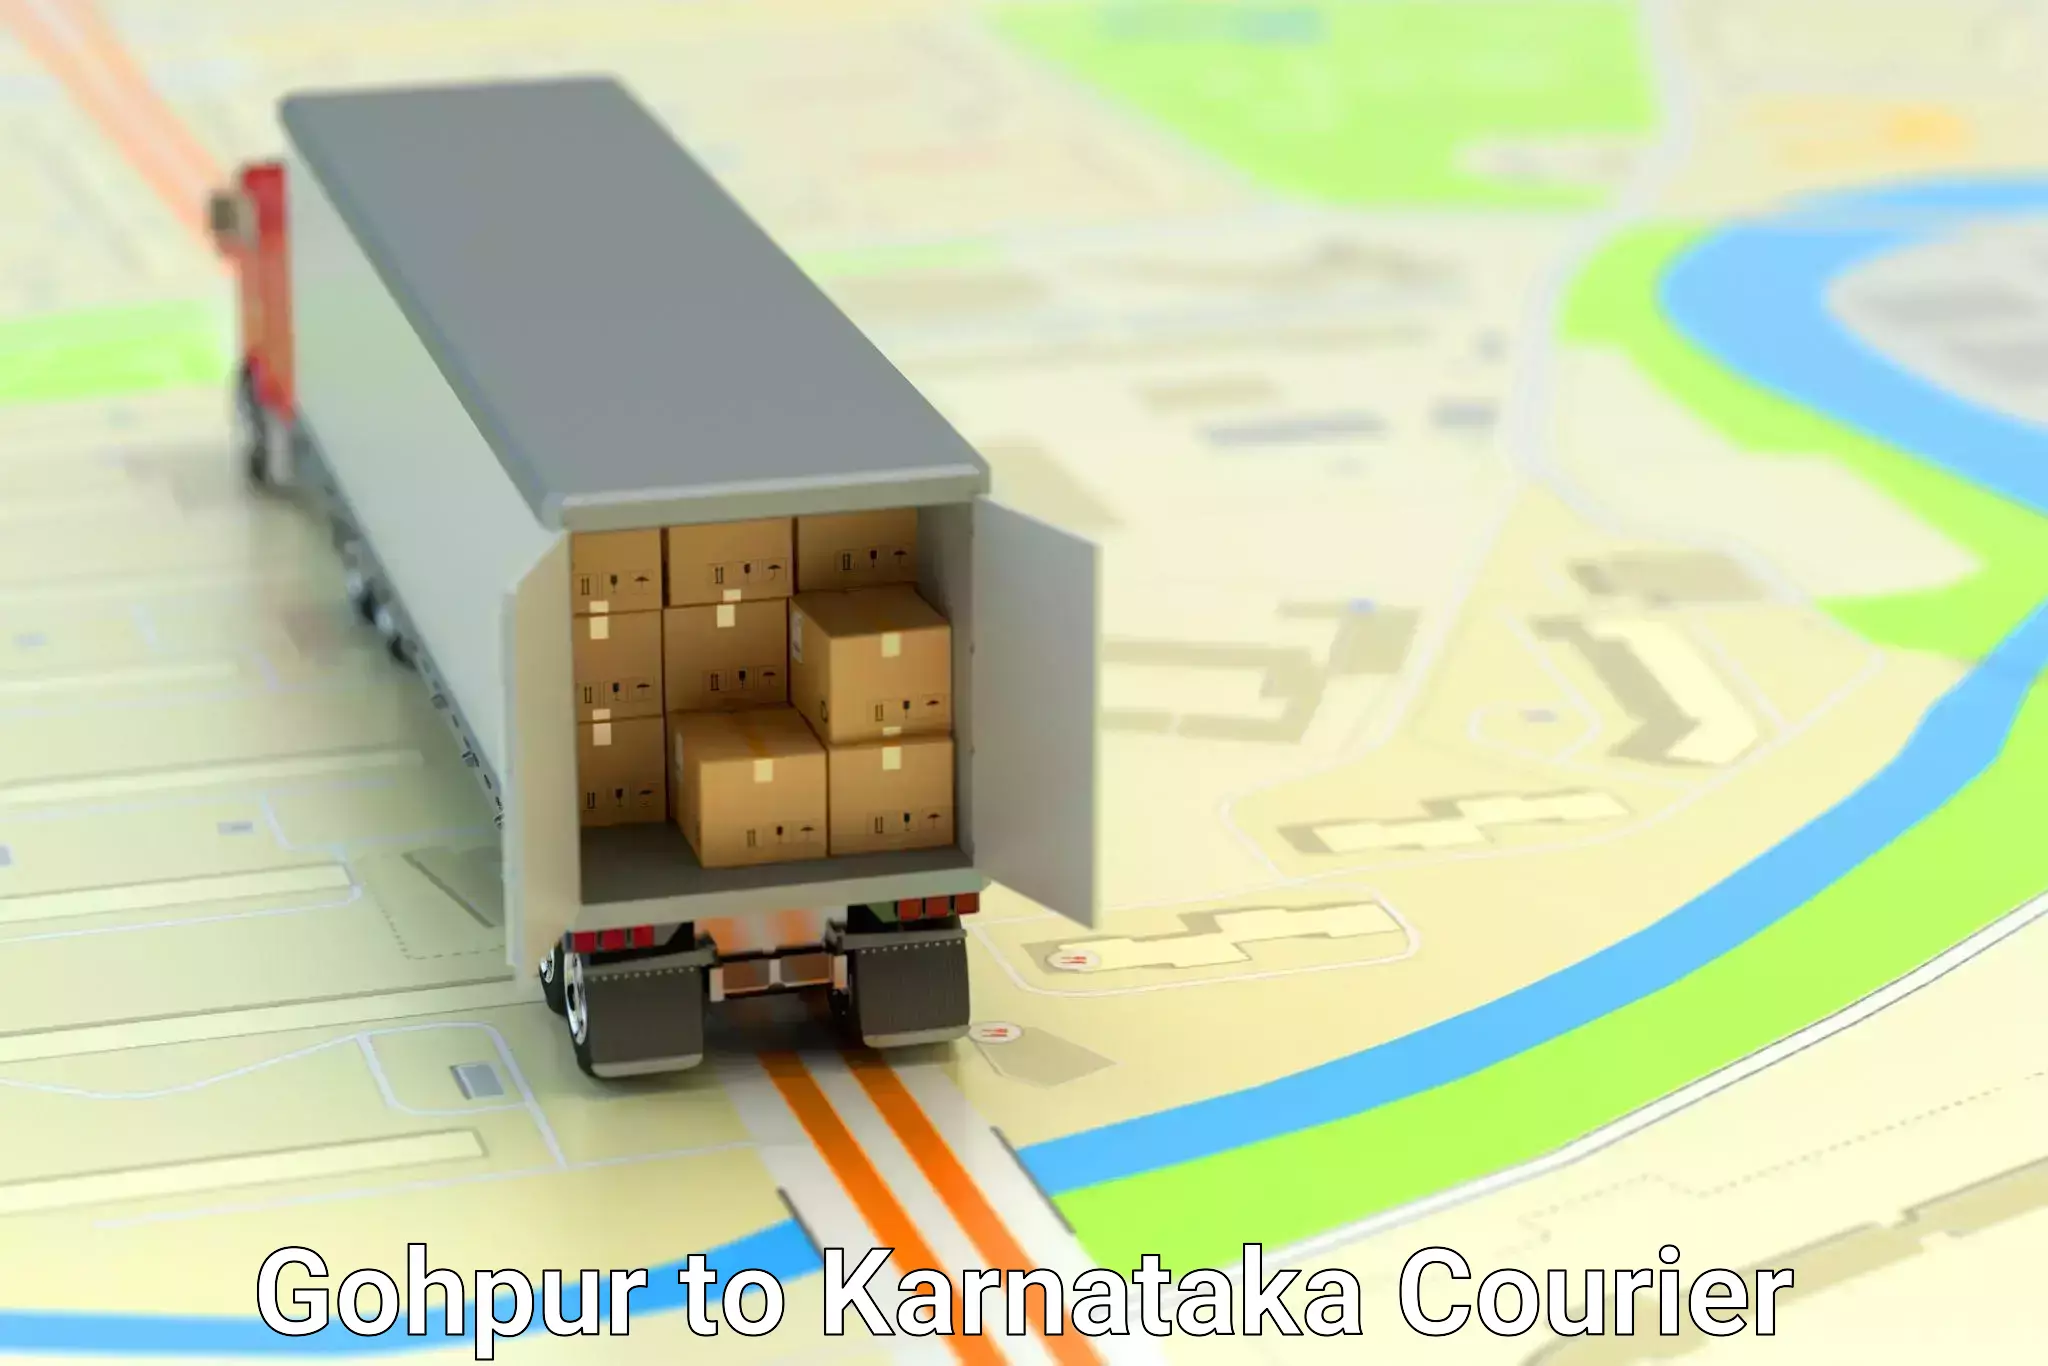 User-friendly courier app in Gohpur to Bhadravathi